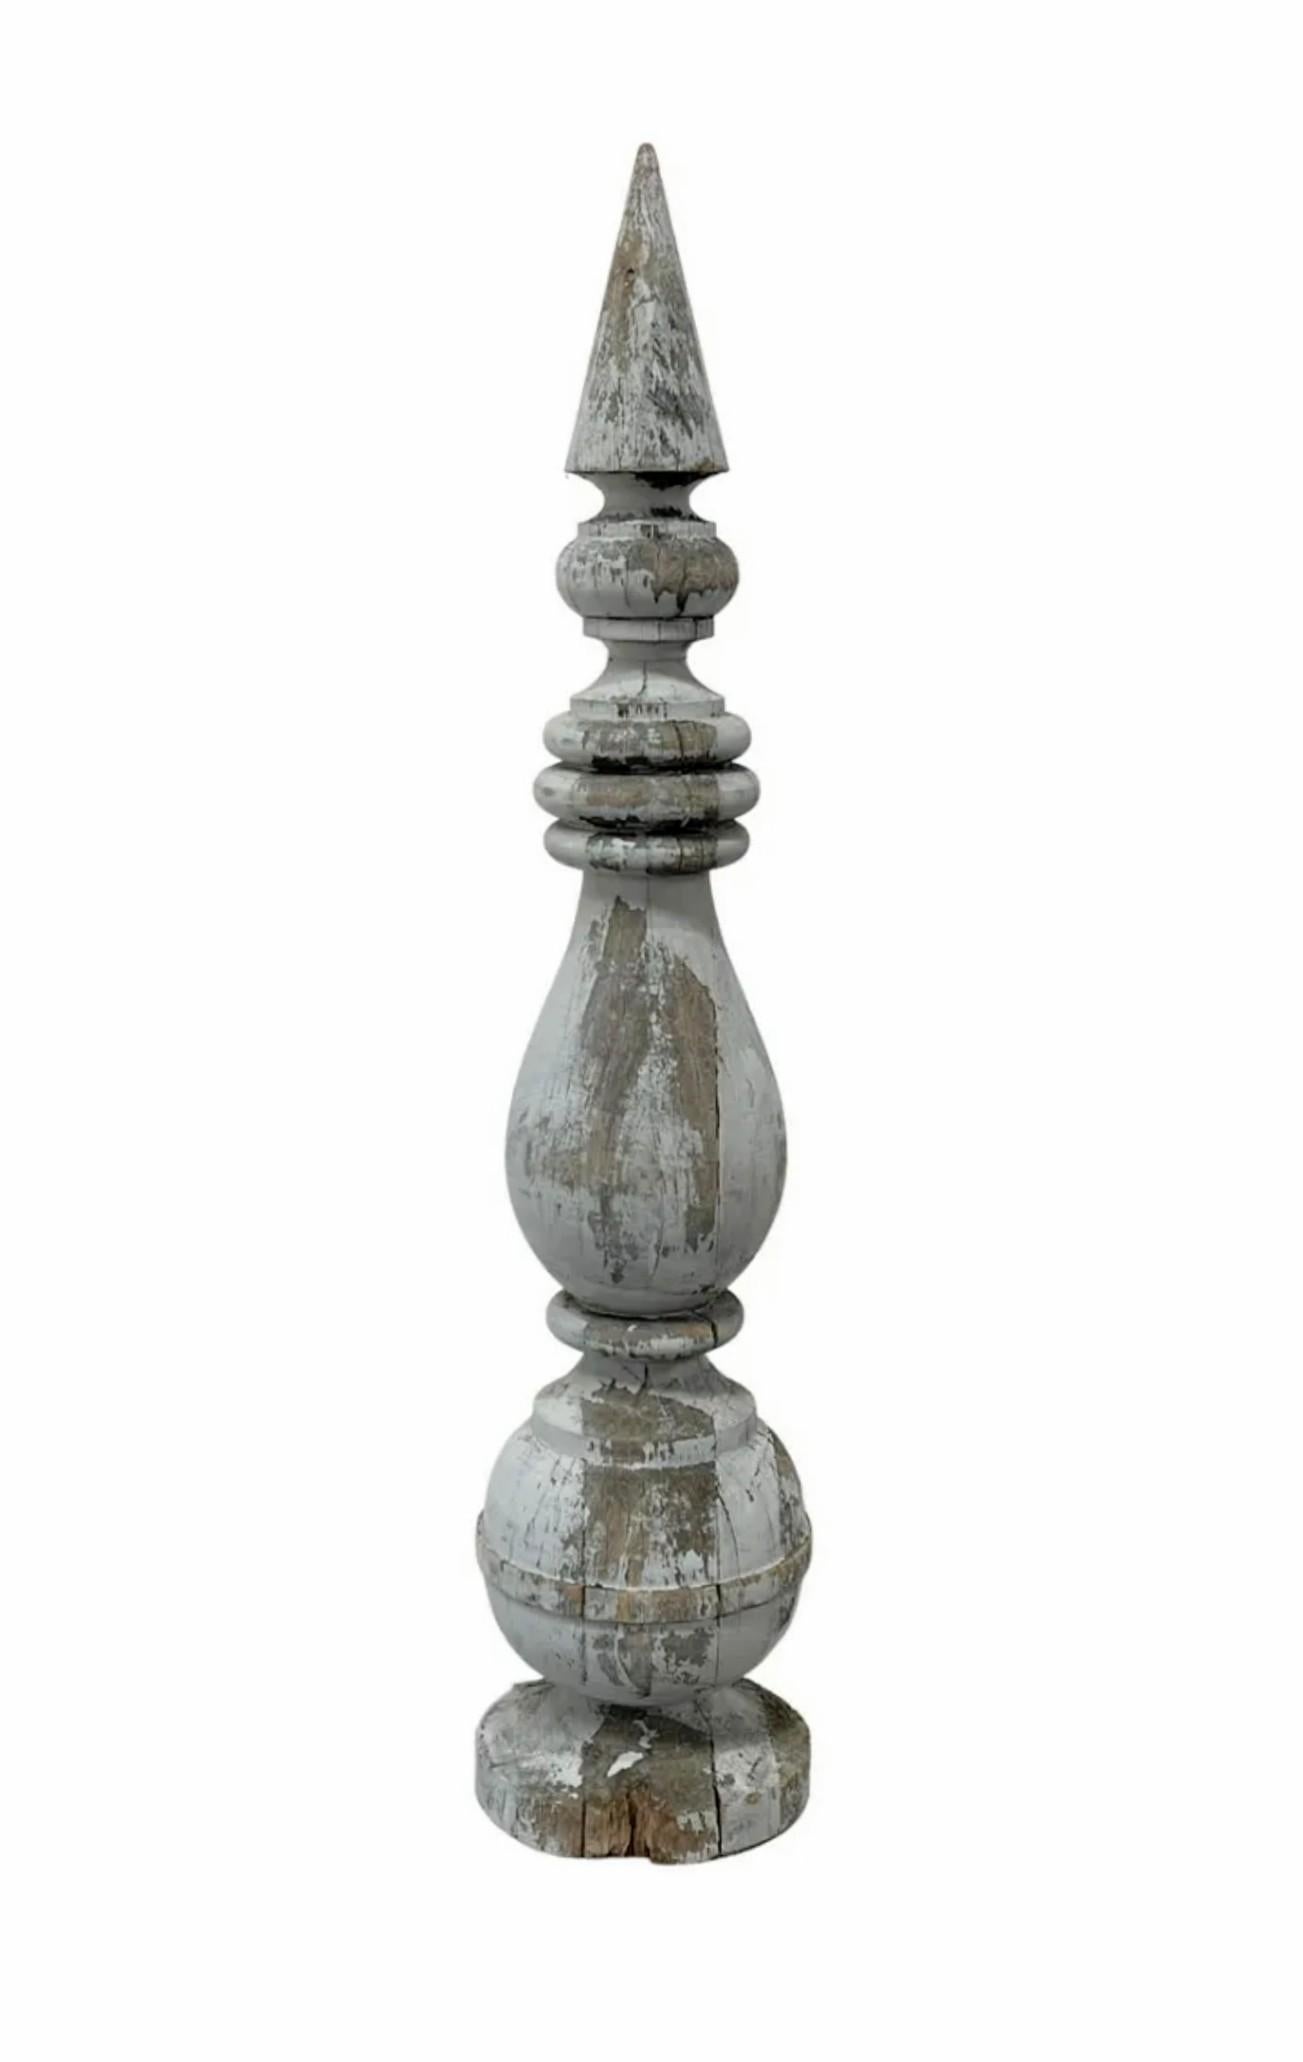 European Tall 19th Century Architectural Painted Wood Finial